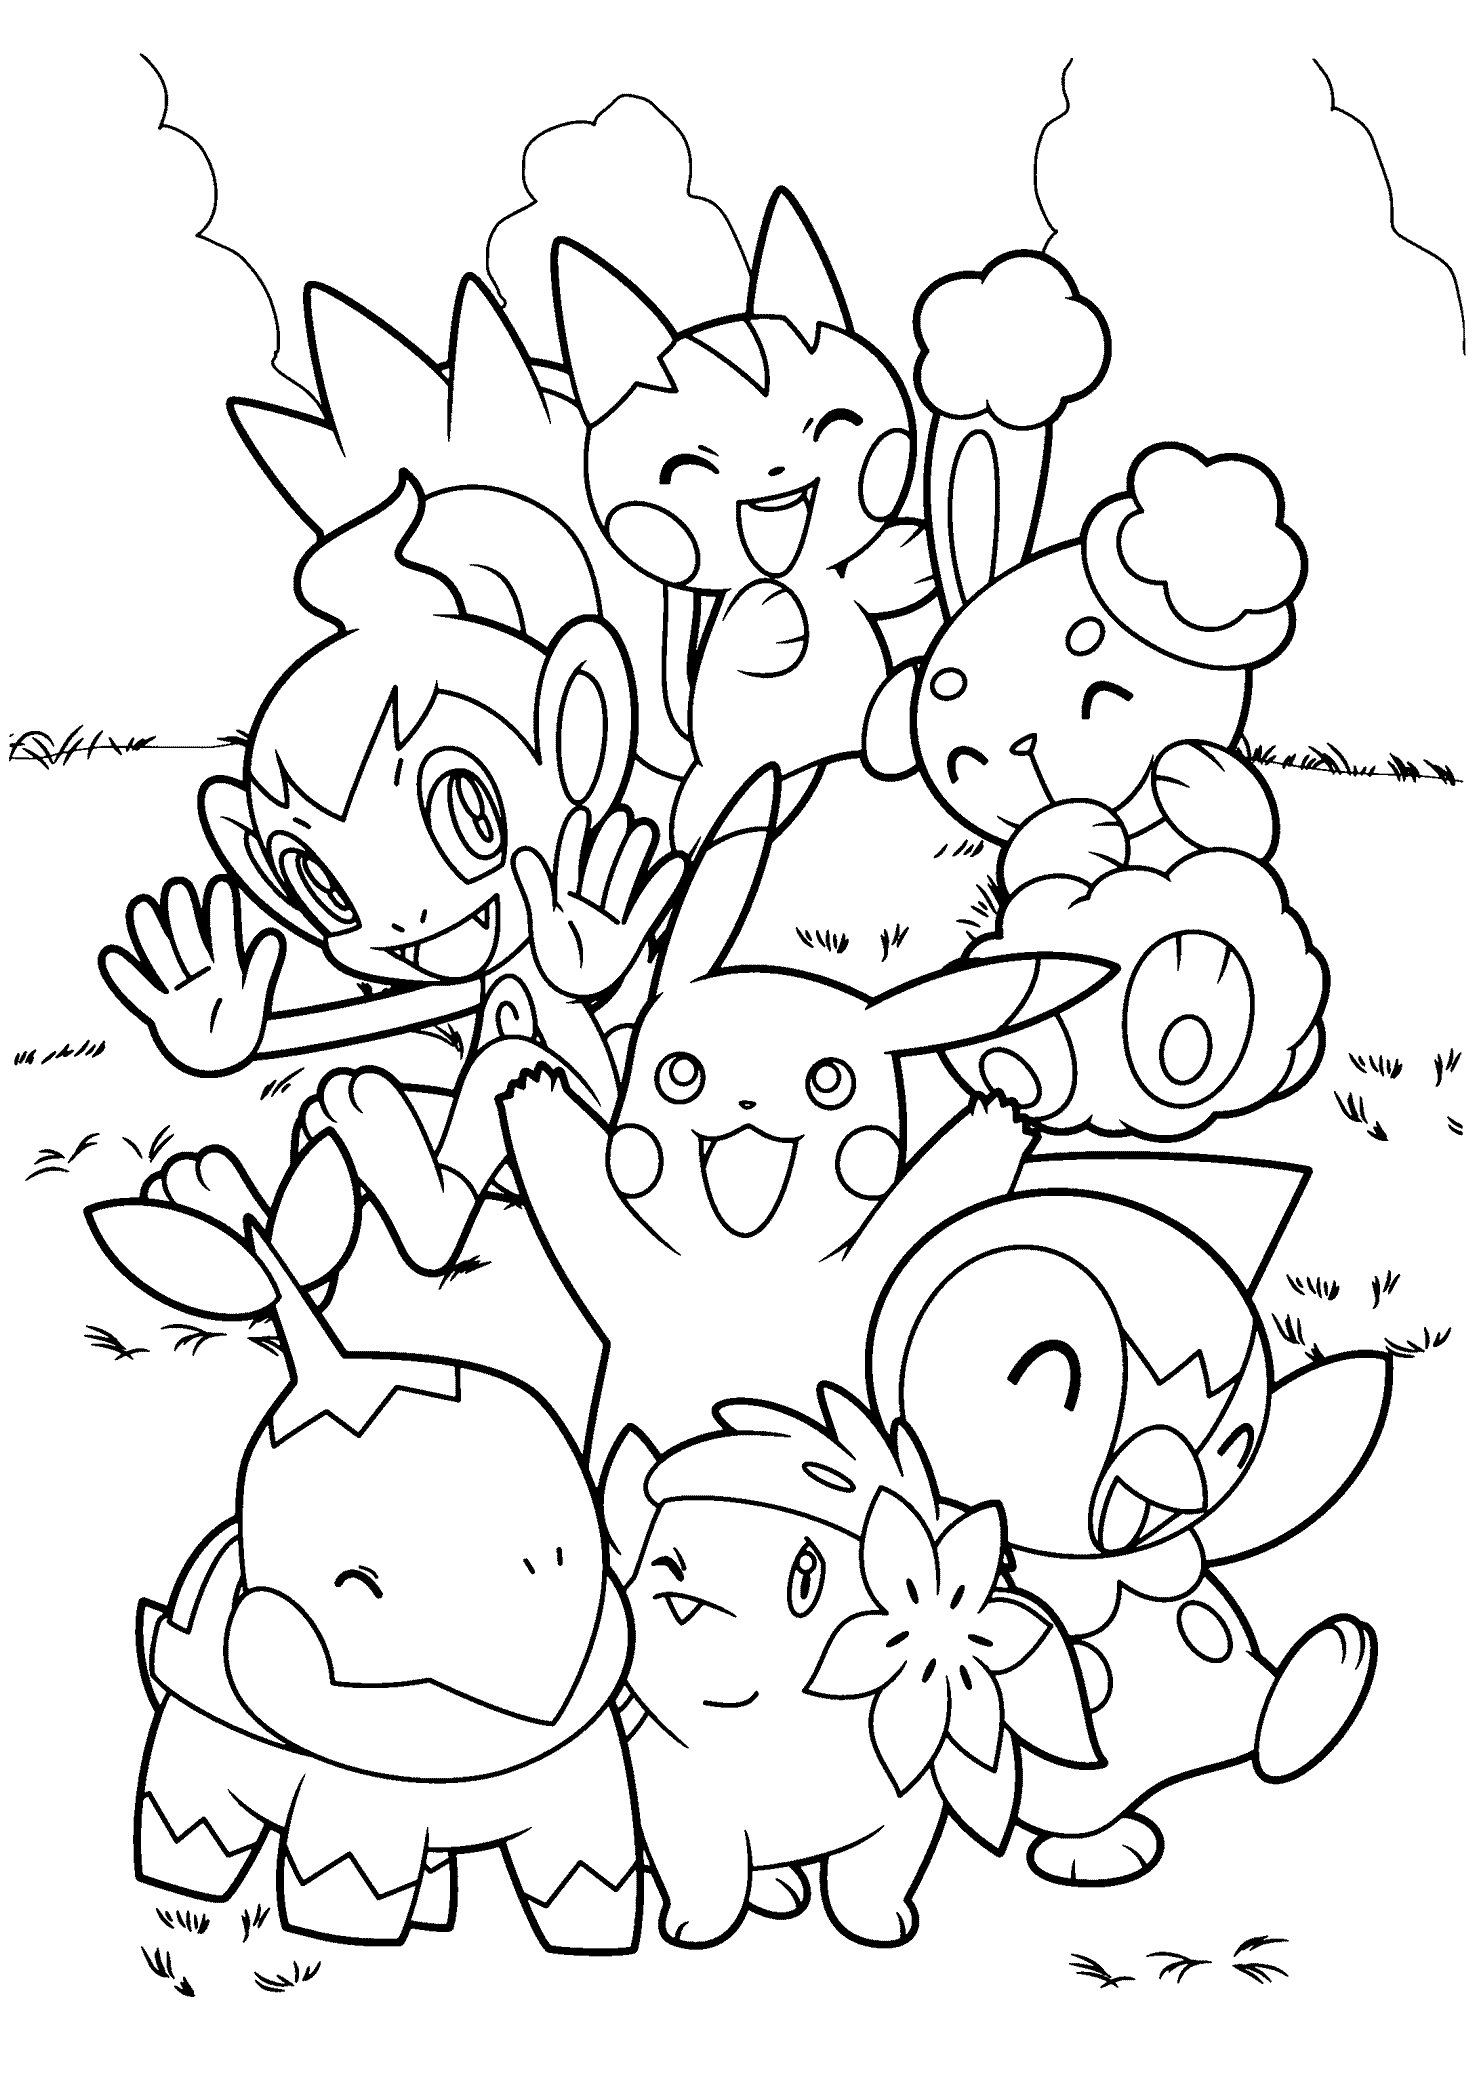 pokemon colouring pages online free adult pokemon coloring page free coloring pages online free online colouring pokemon pages 